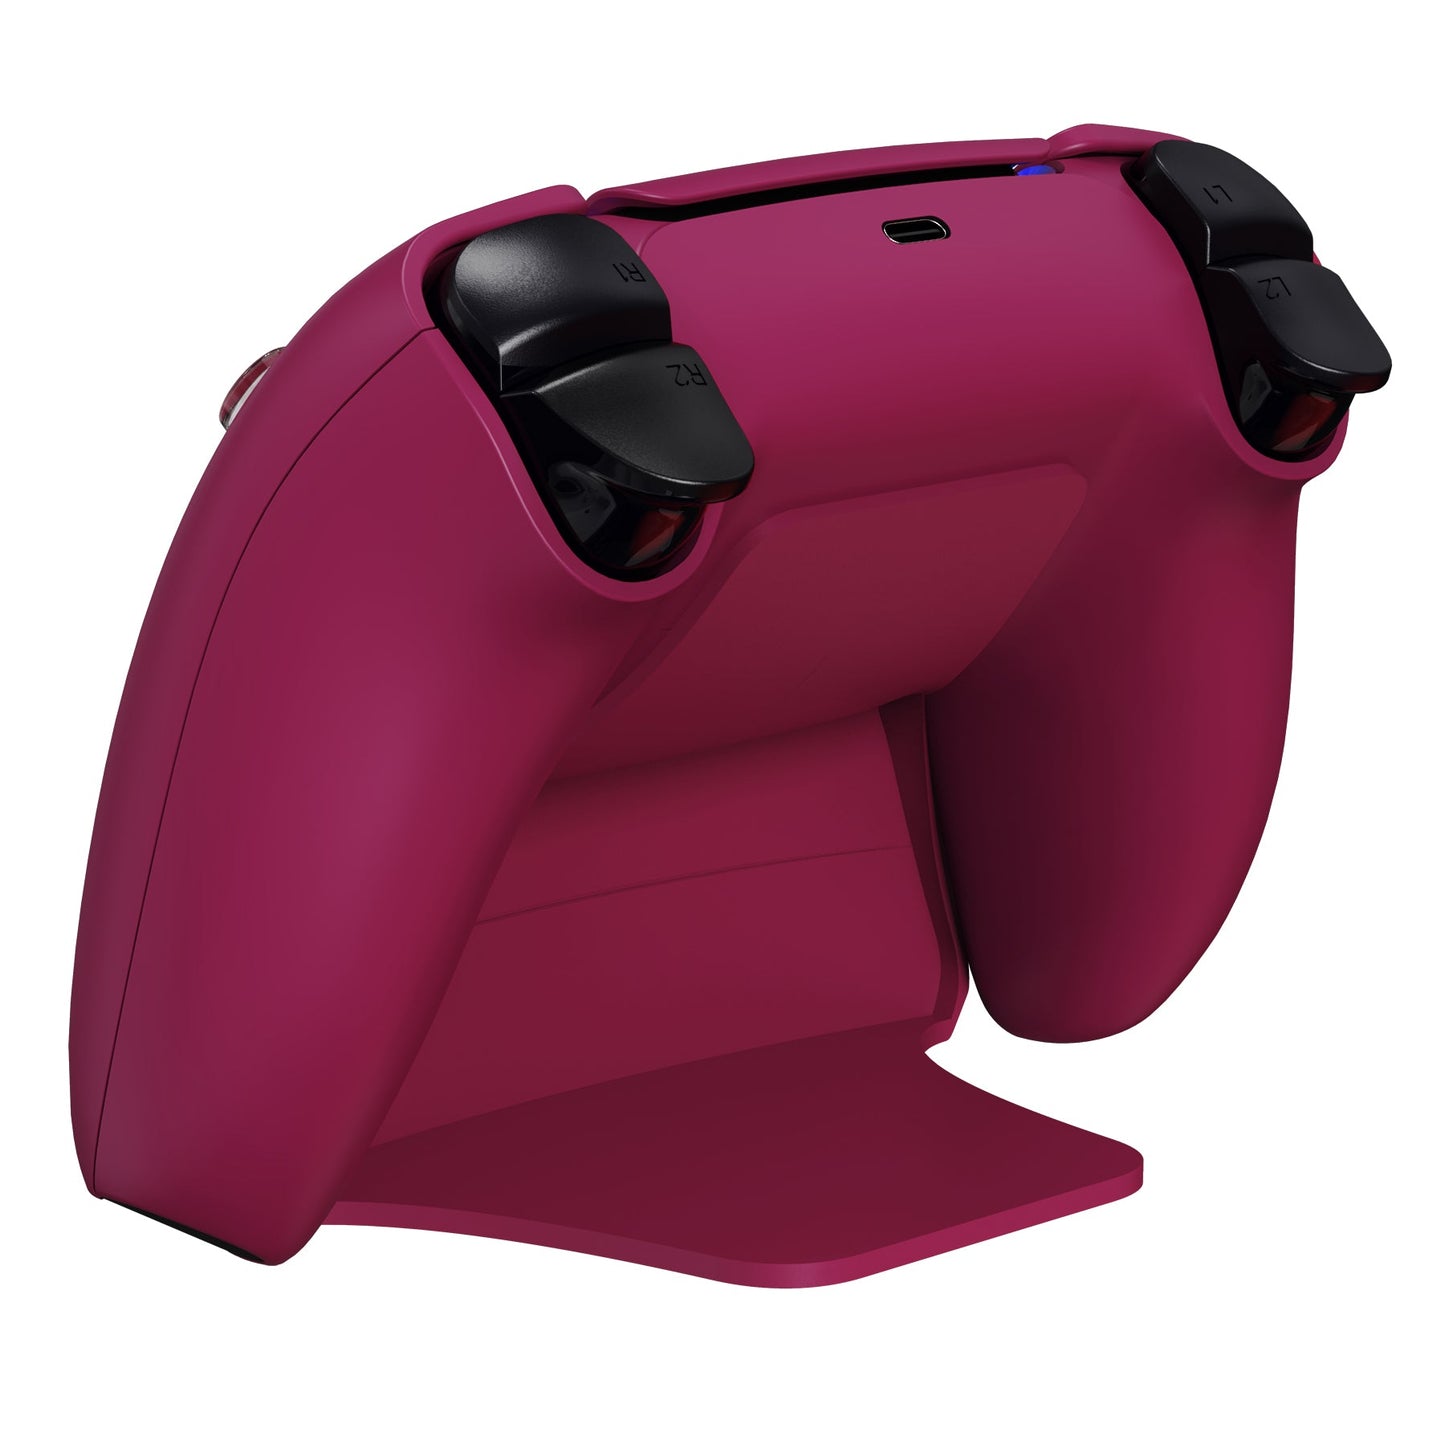 PlayVital Cosmic Red Game Controller Stand for PS5, Gamepad Stand for PS5, Display Desk Holder for PS5 Controller with Rubber Pads - PFPJ047 PlayVital